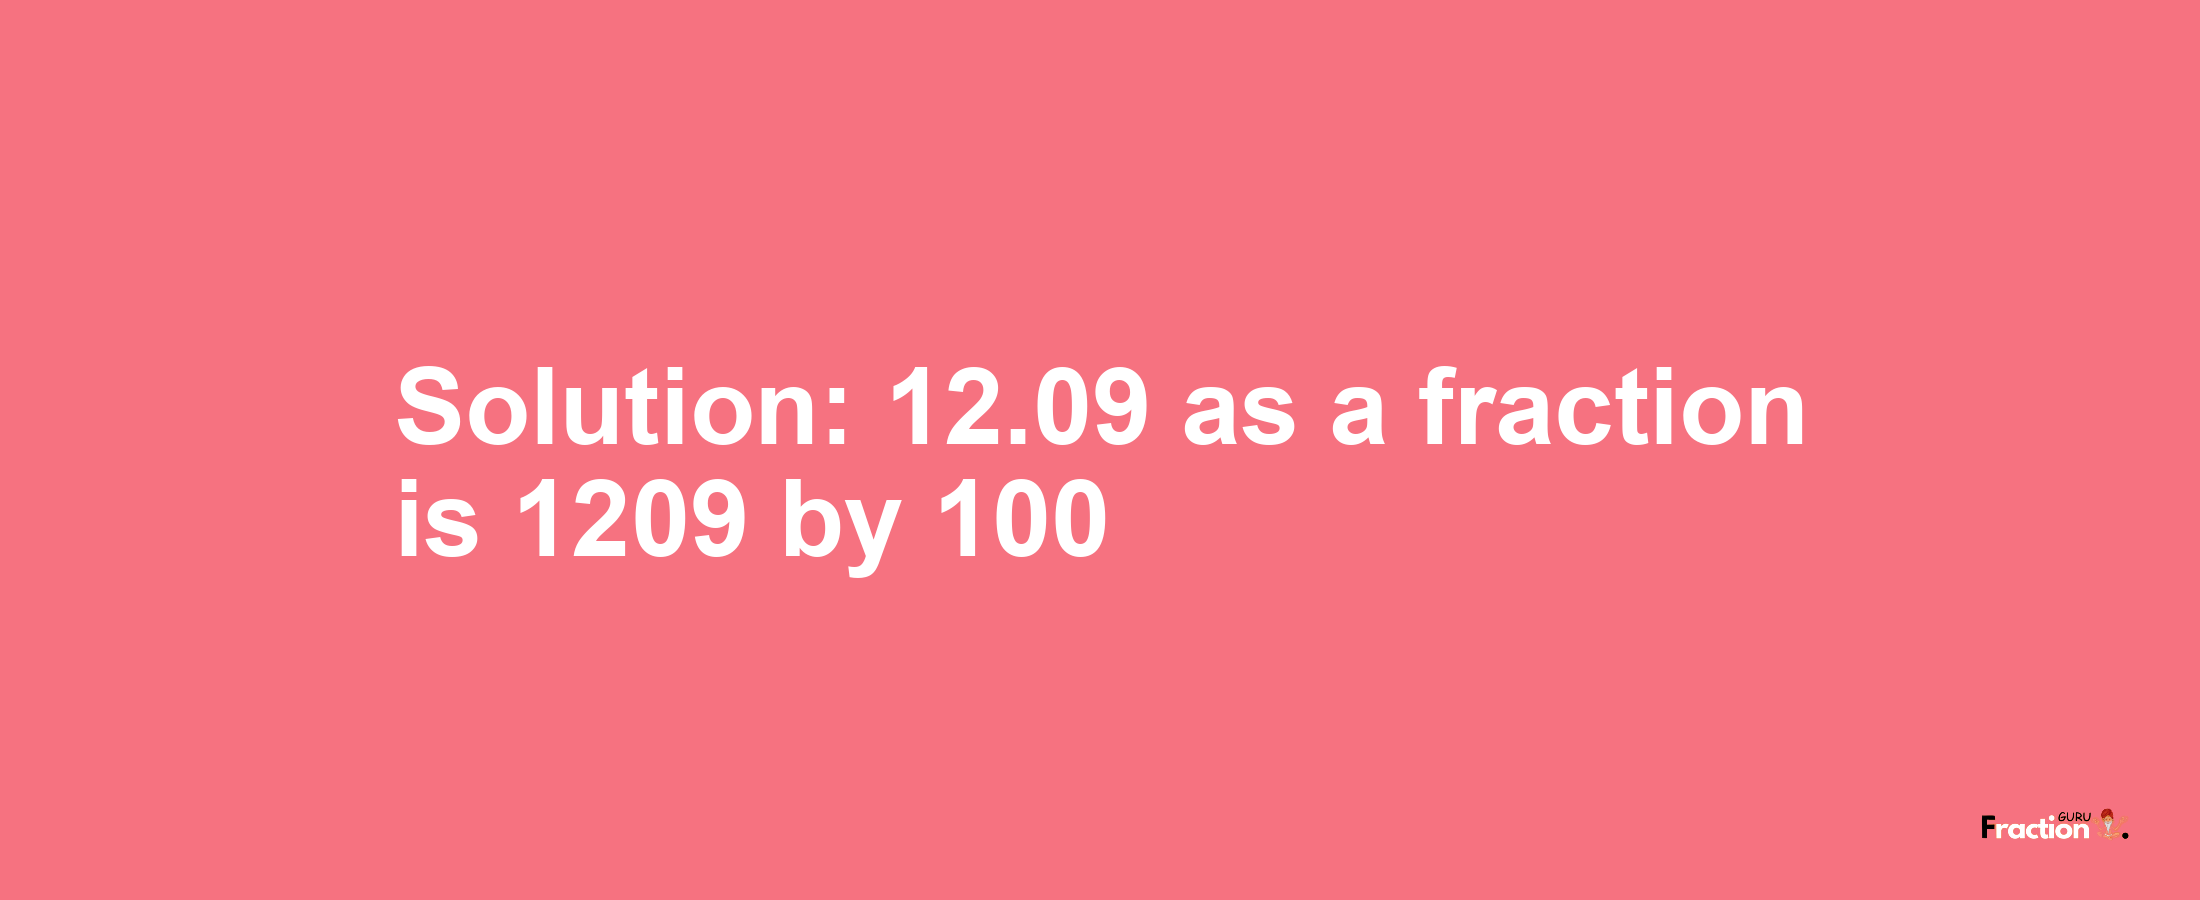 Solution:12.09 as a fraction is 1209/100